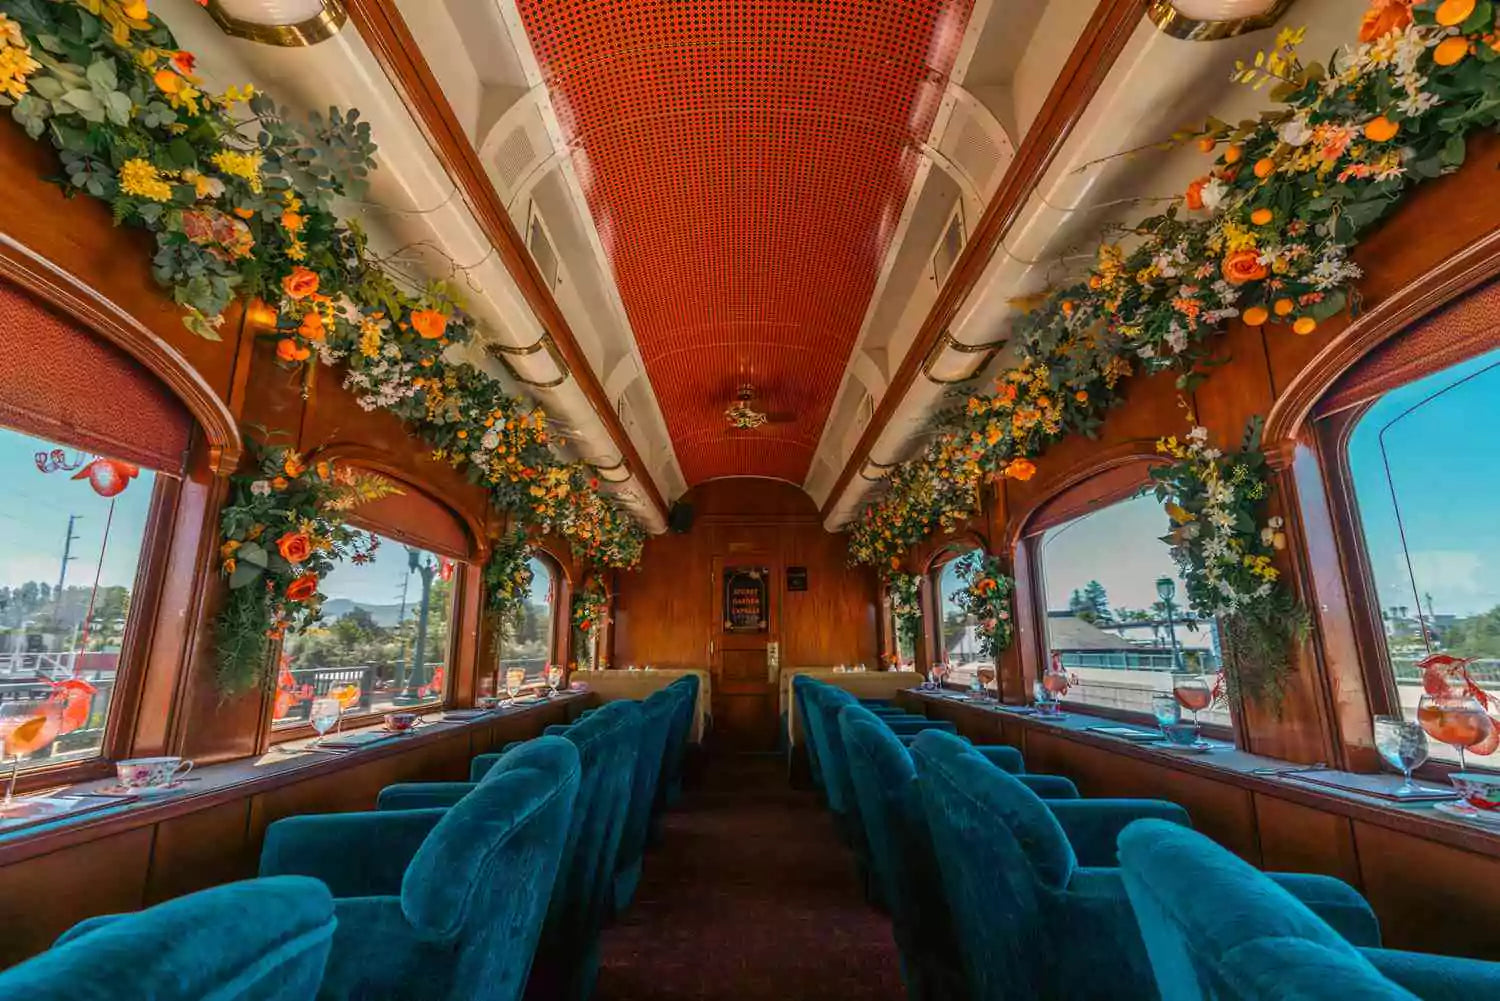 Napa Valley Wine Train Adventures: Mobile gourmet restaurant offering a culinary journey with meals and local wines, plus special themed tours.